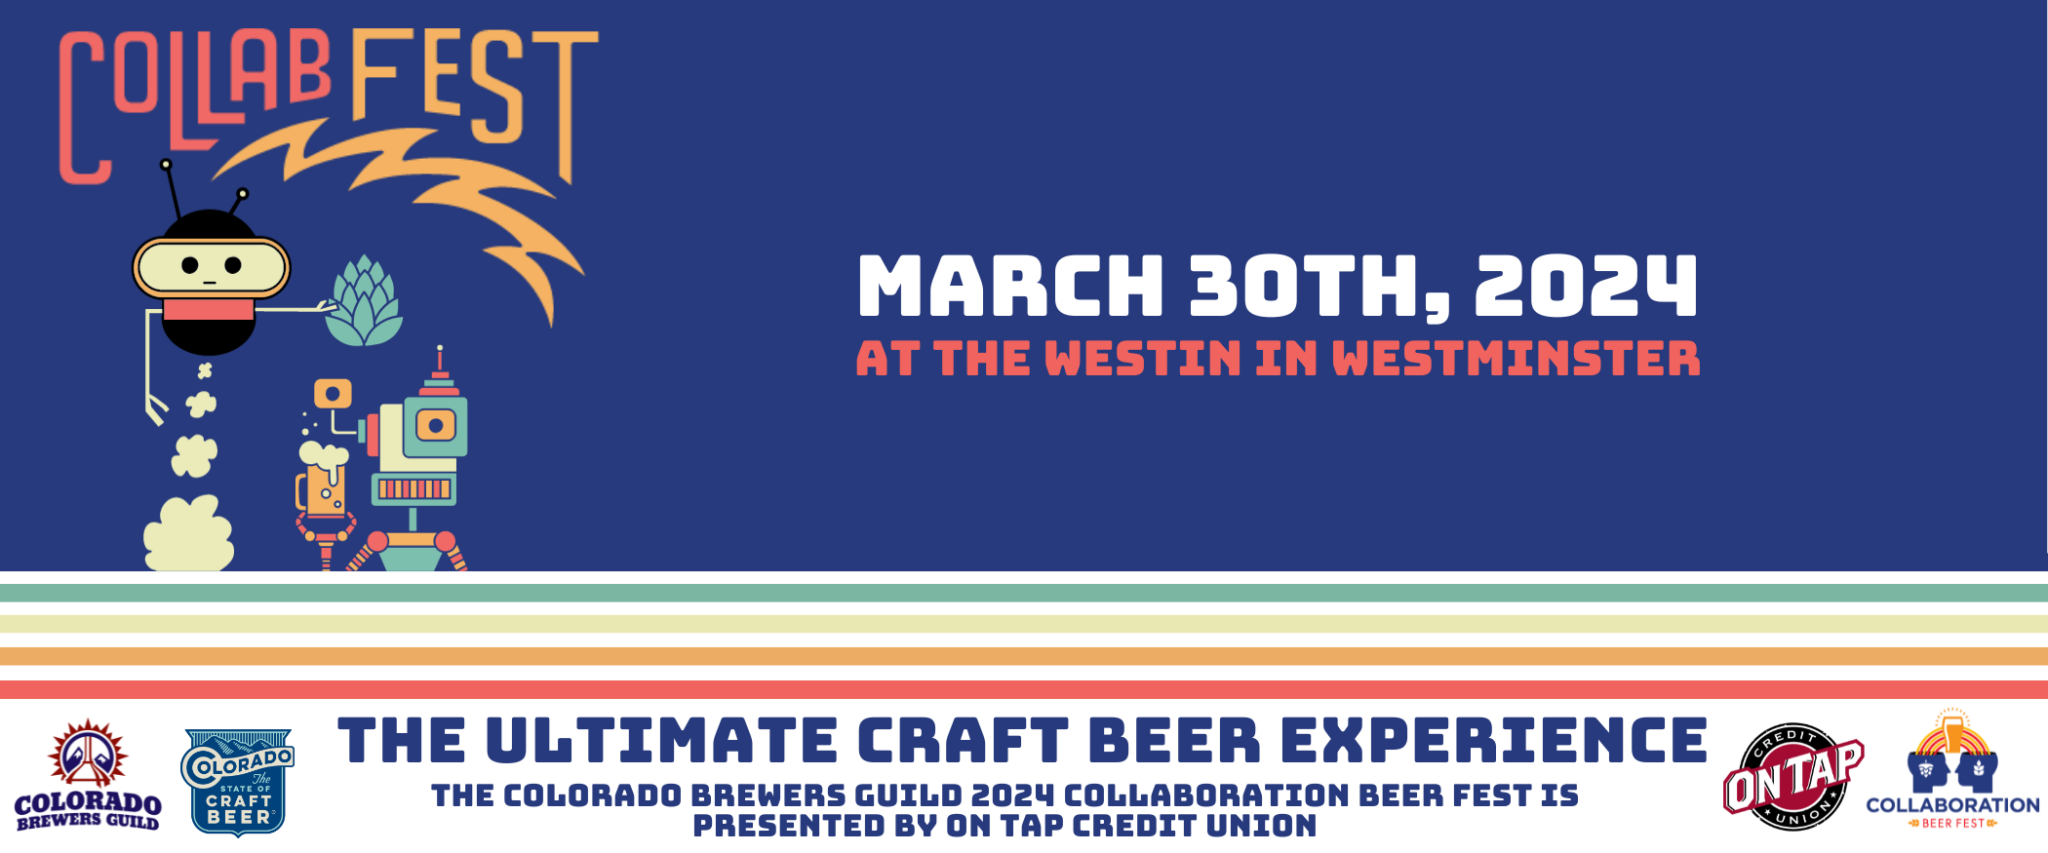 180 Breweries Represented at Collab Fest